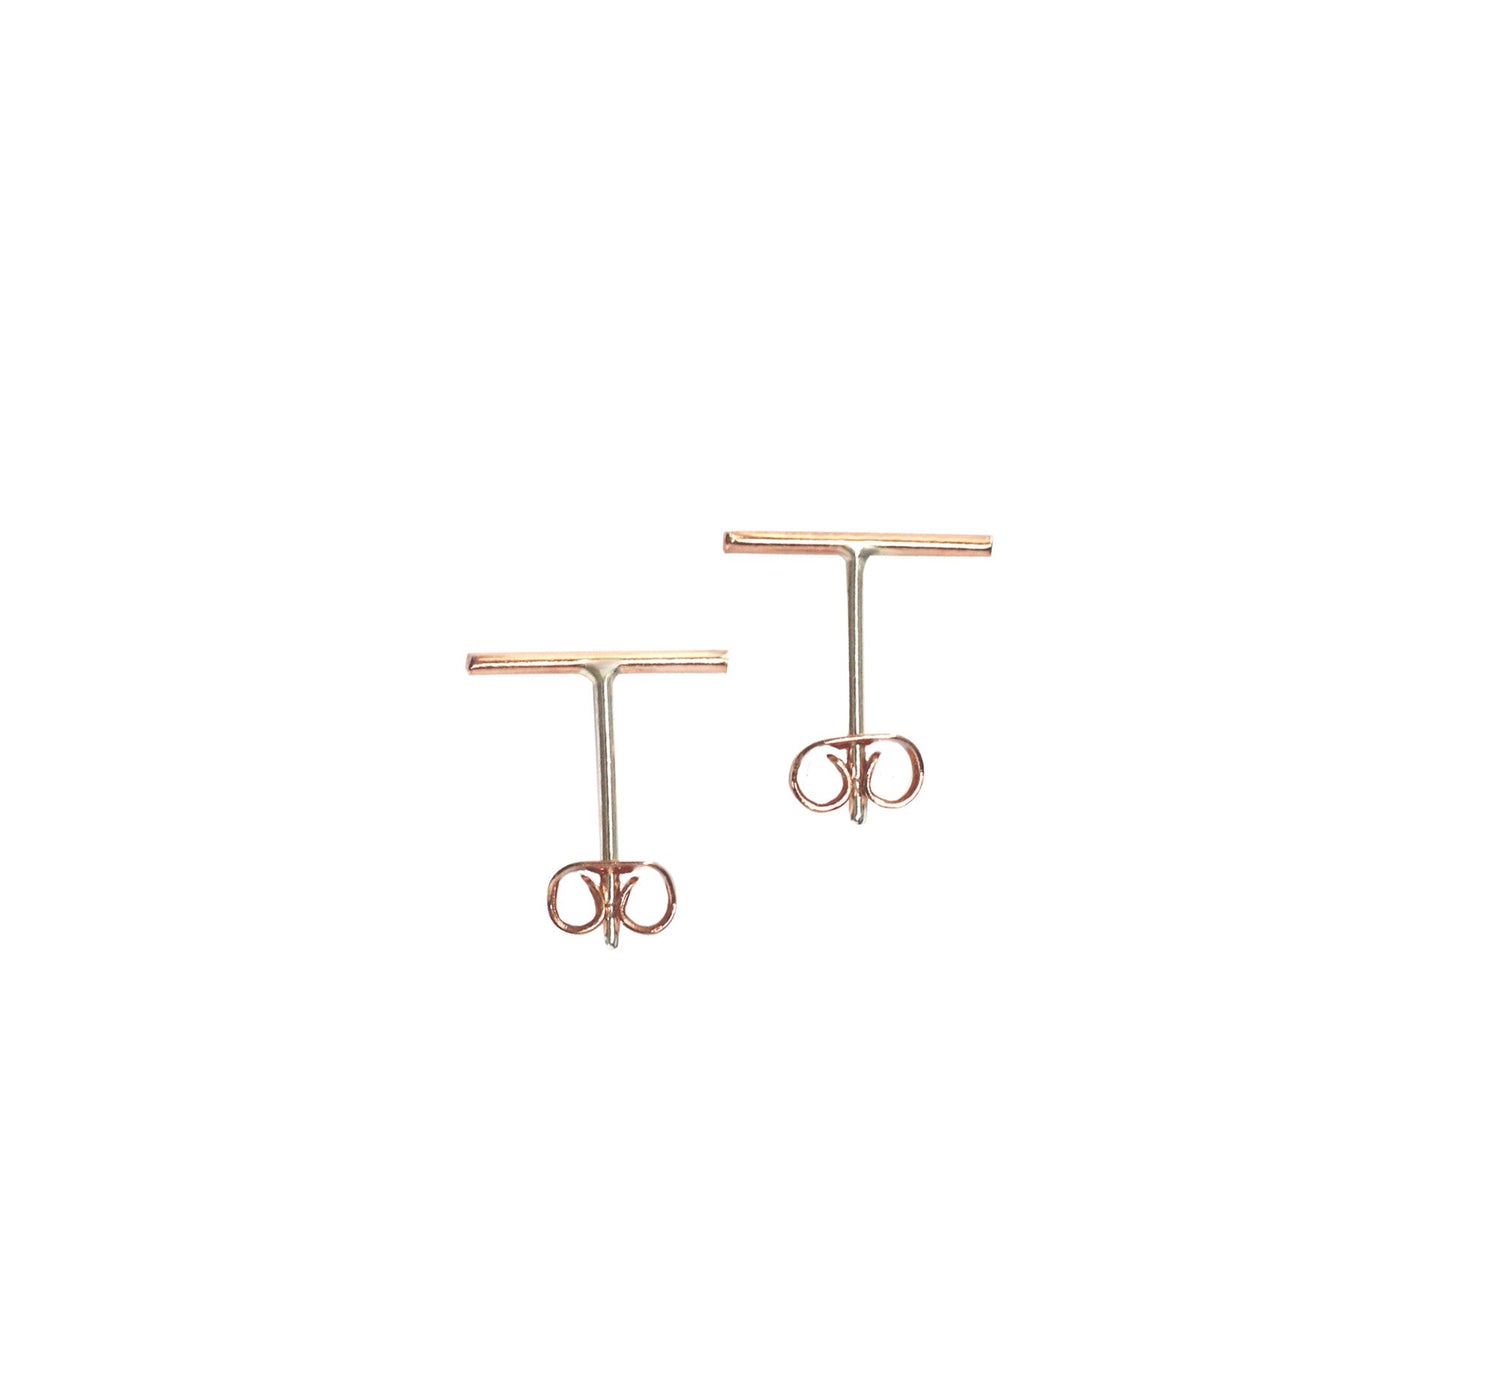 TUNDRA 9ct RED GOLD Earrings